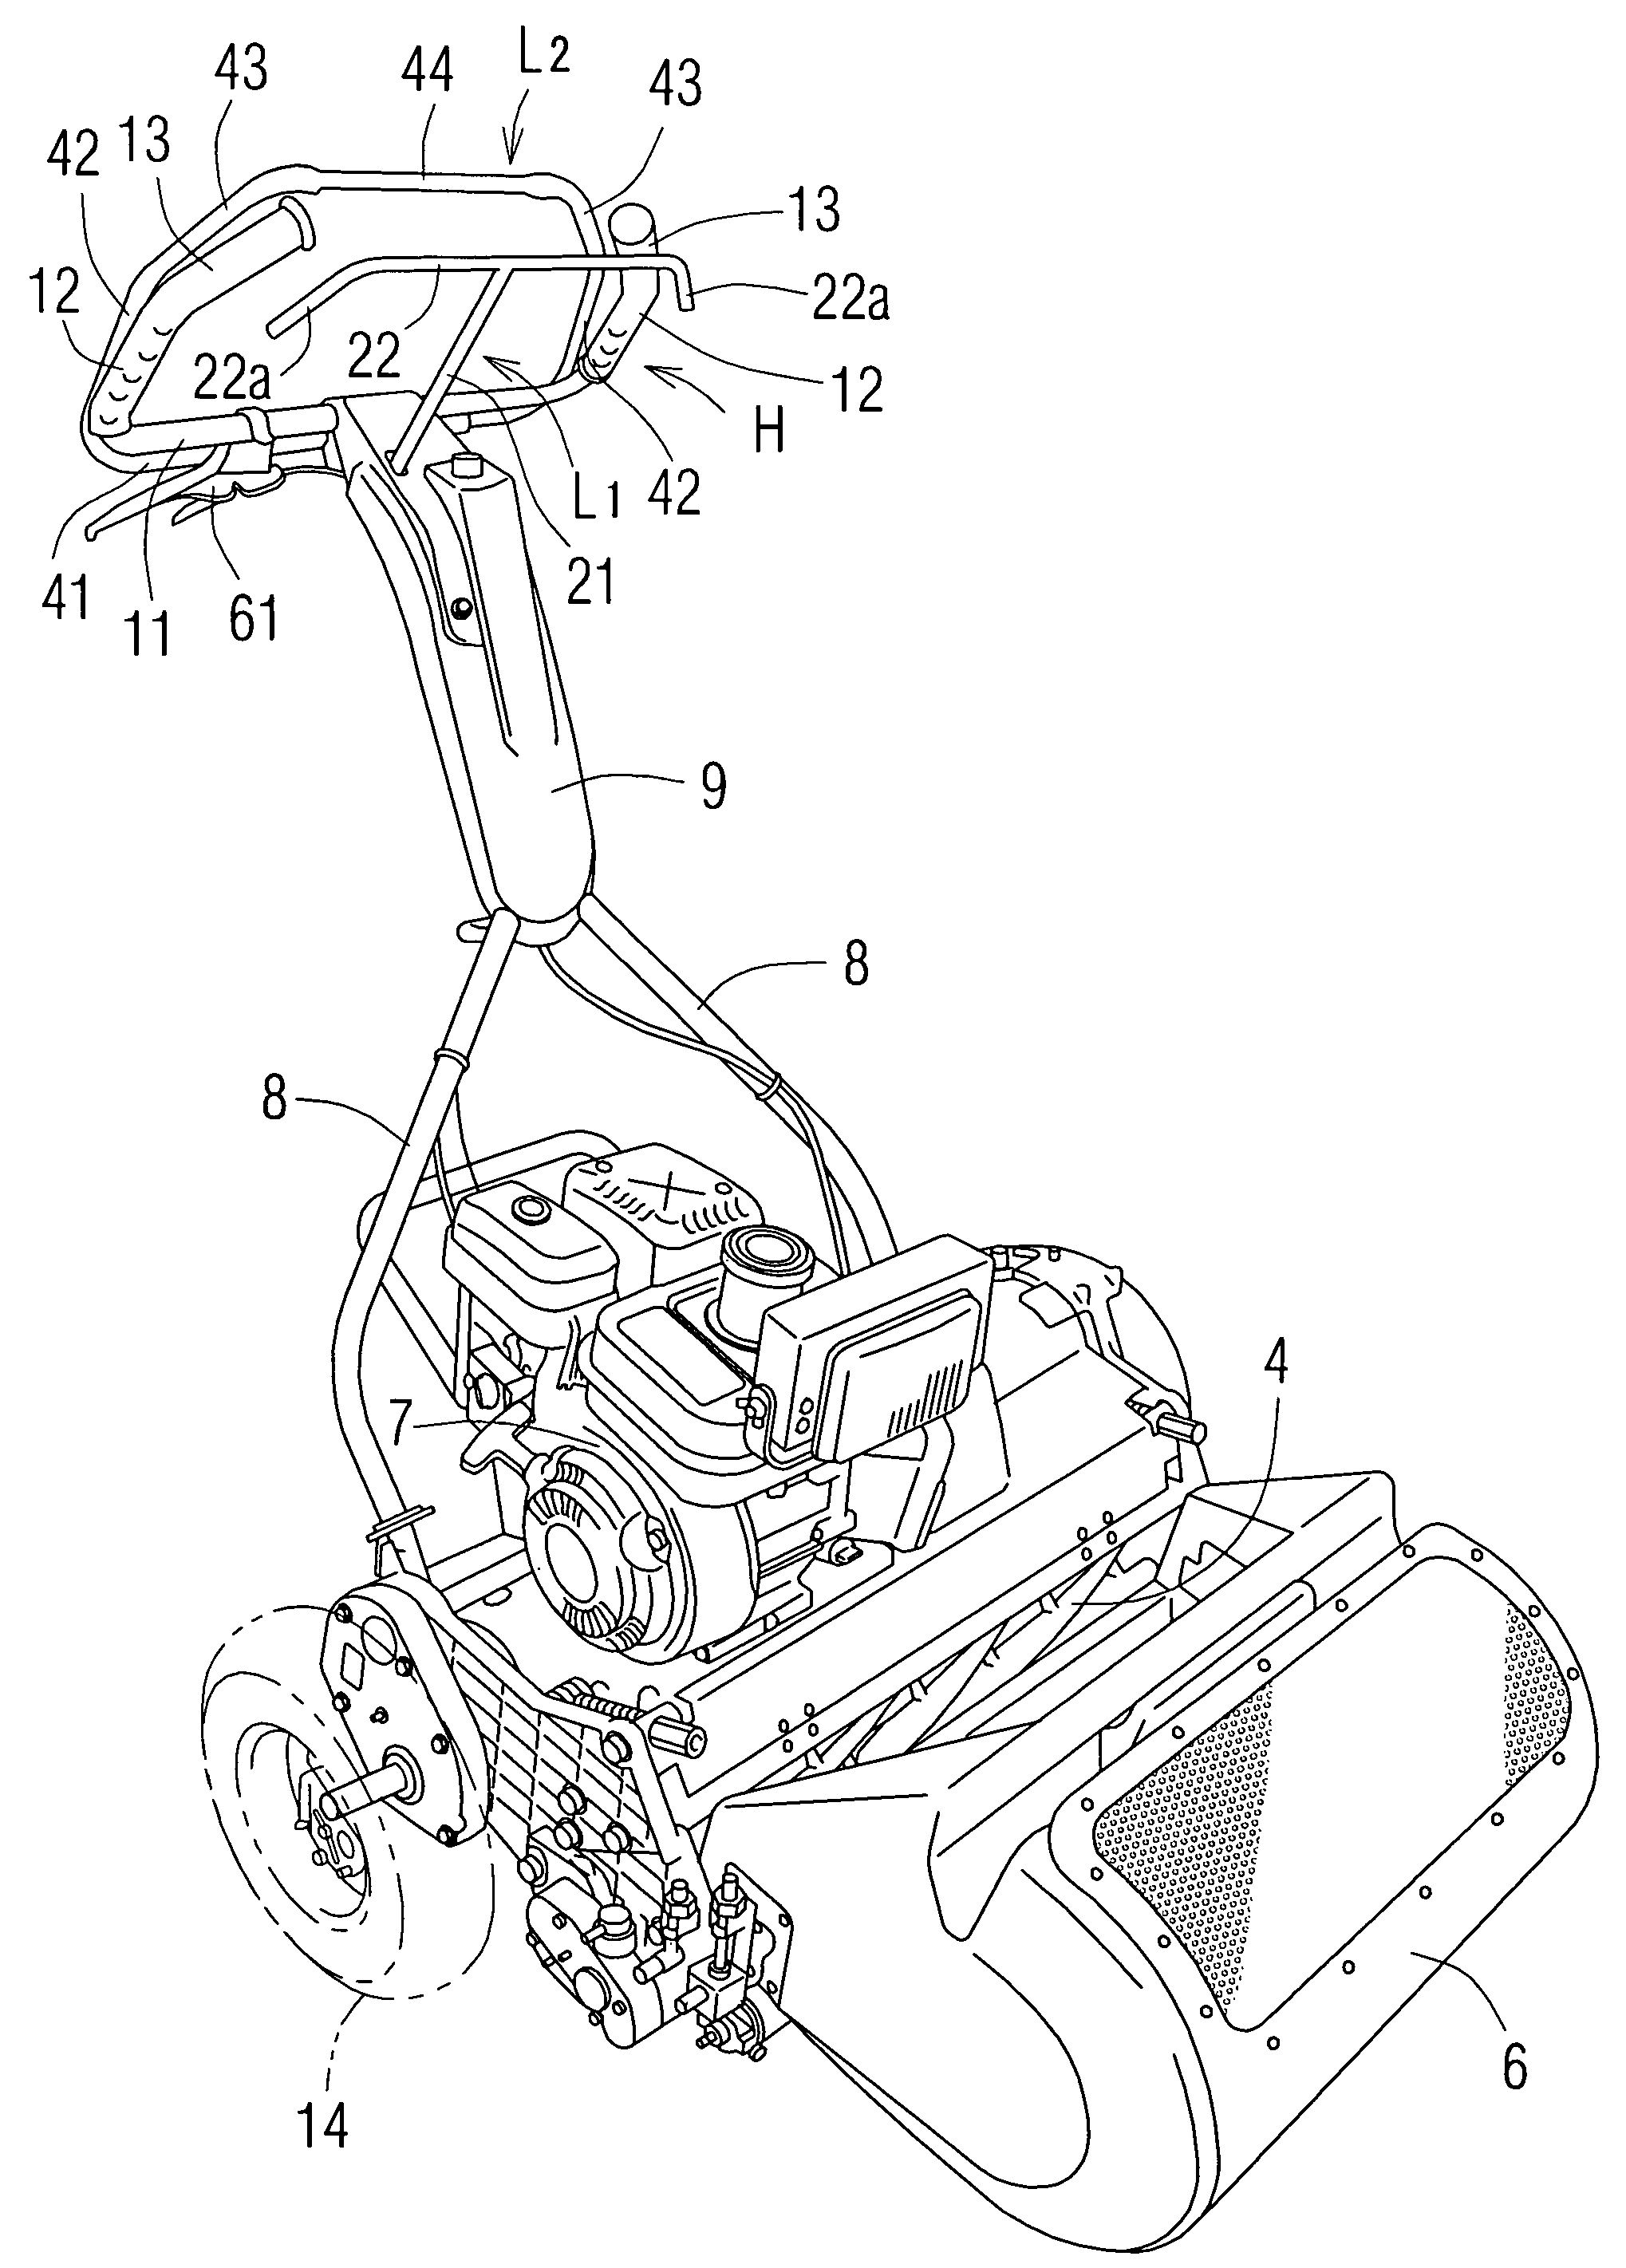 Drive operation device of walk-behind lawn mower